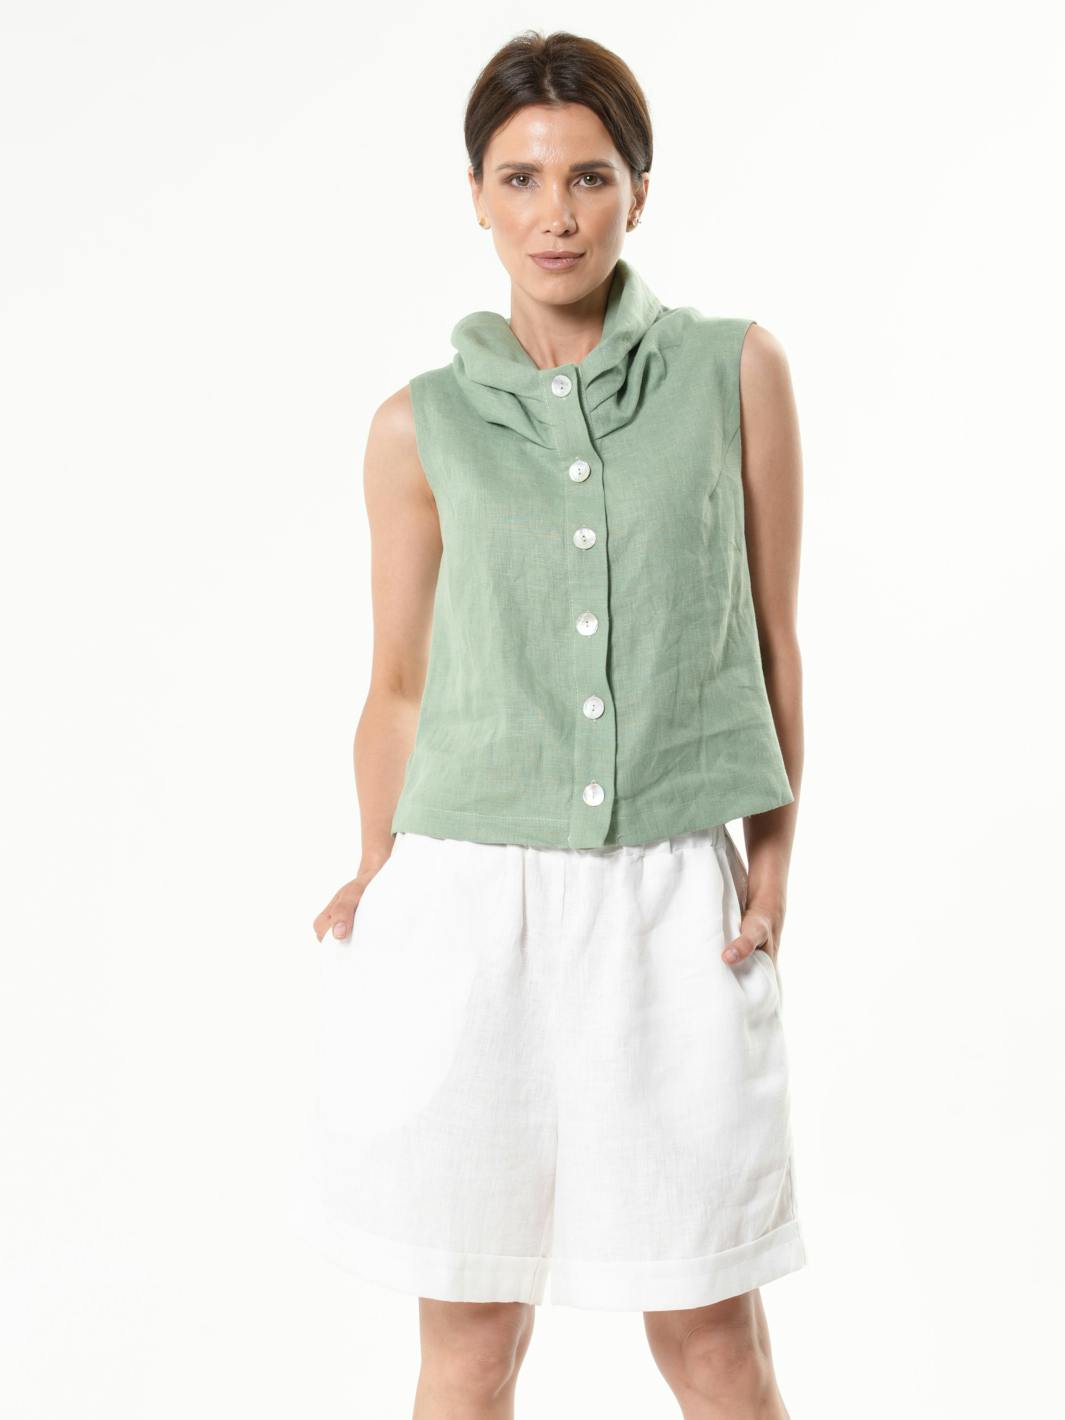  Buttoned Sleeveless Linen Top, a product by METAMORPHOZA